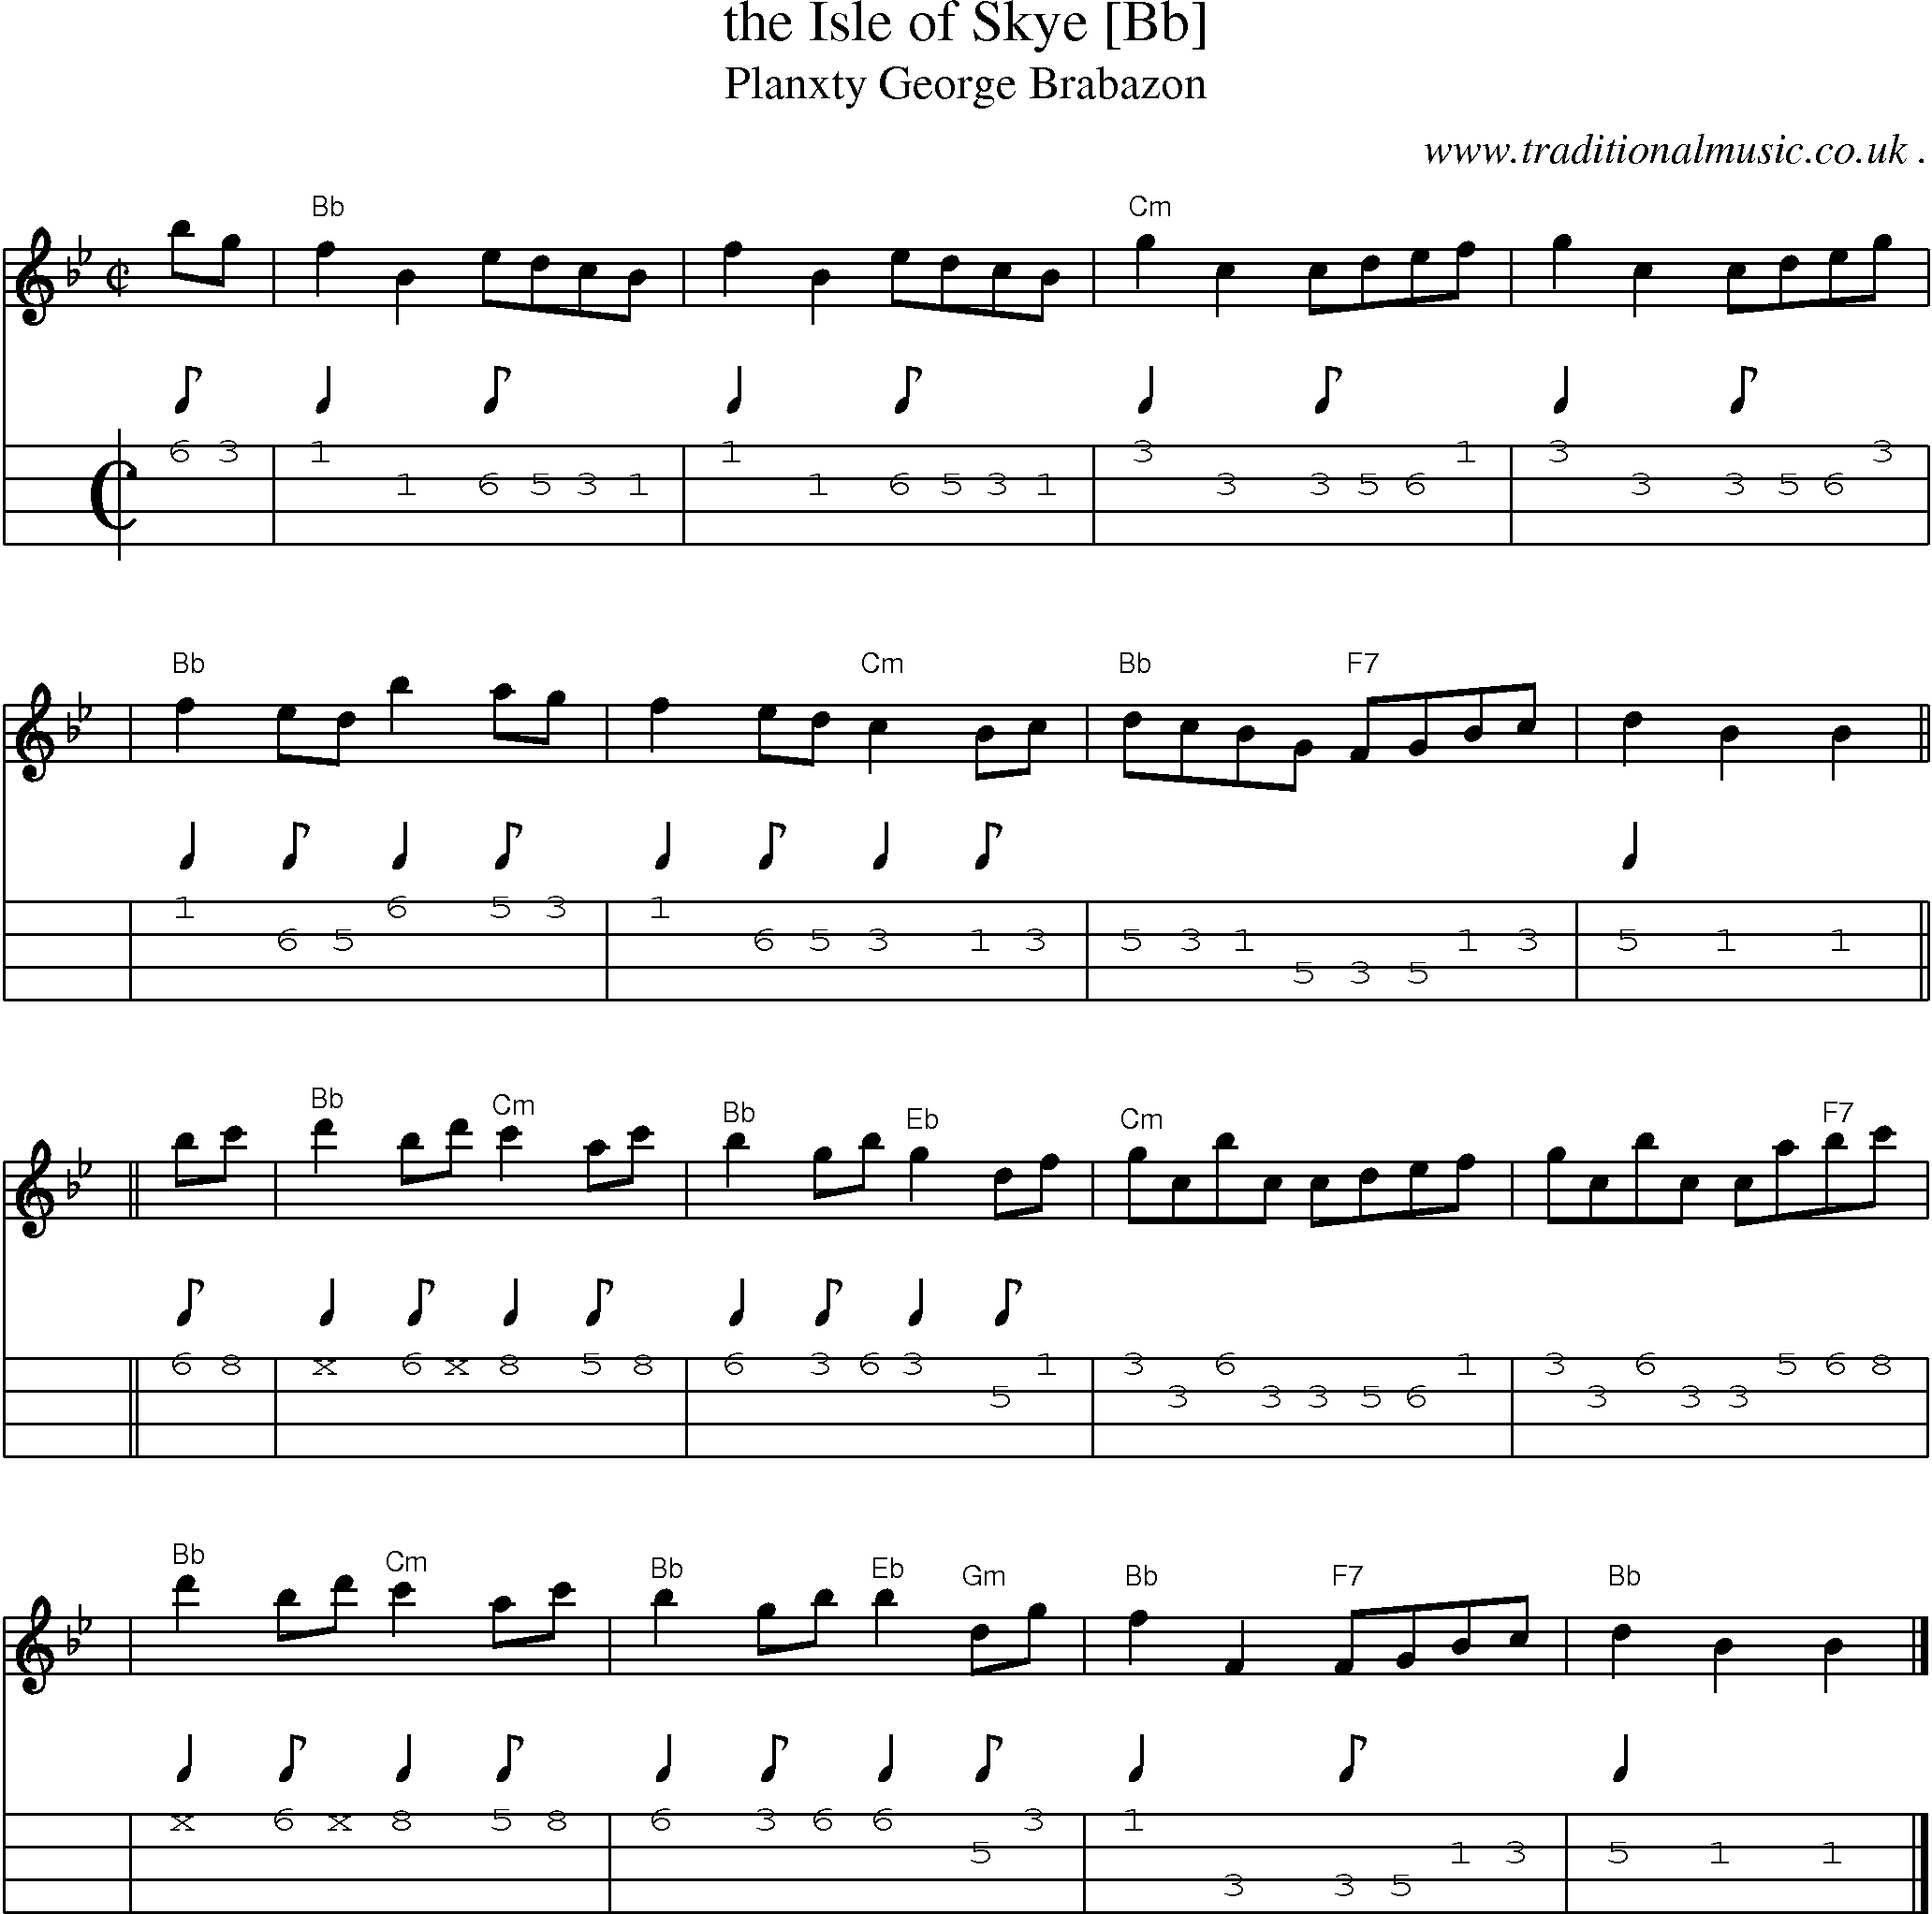 Sheet-music  score, Chords and Mandolin Tabs for The Isle Of Skye [bb]